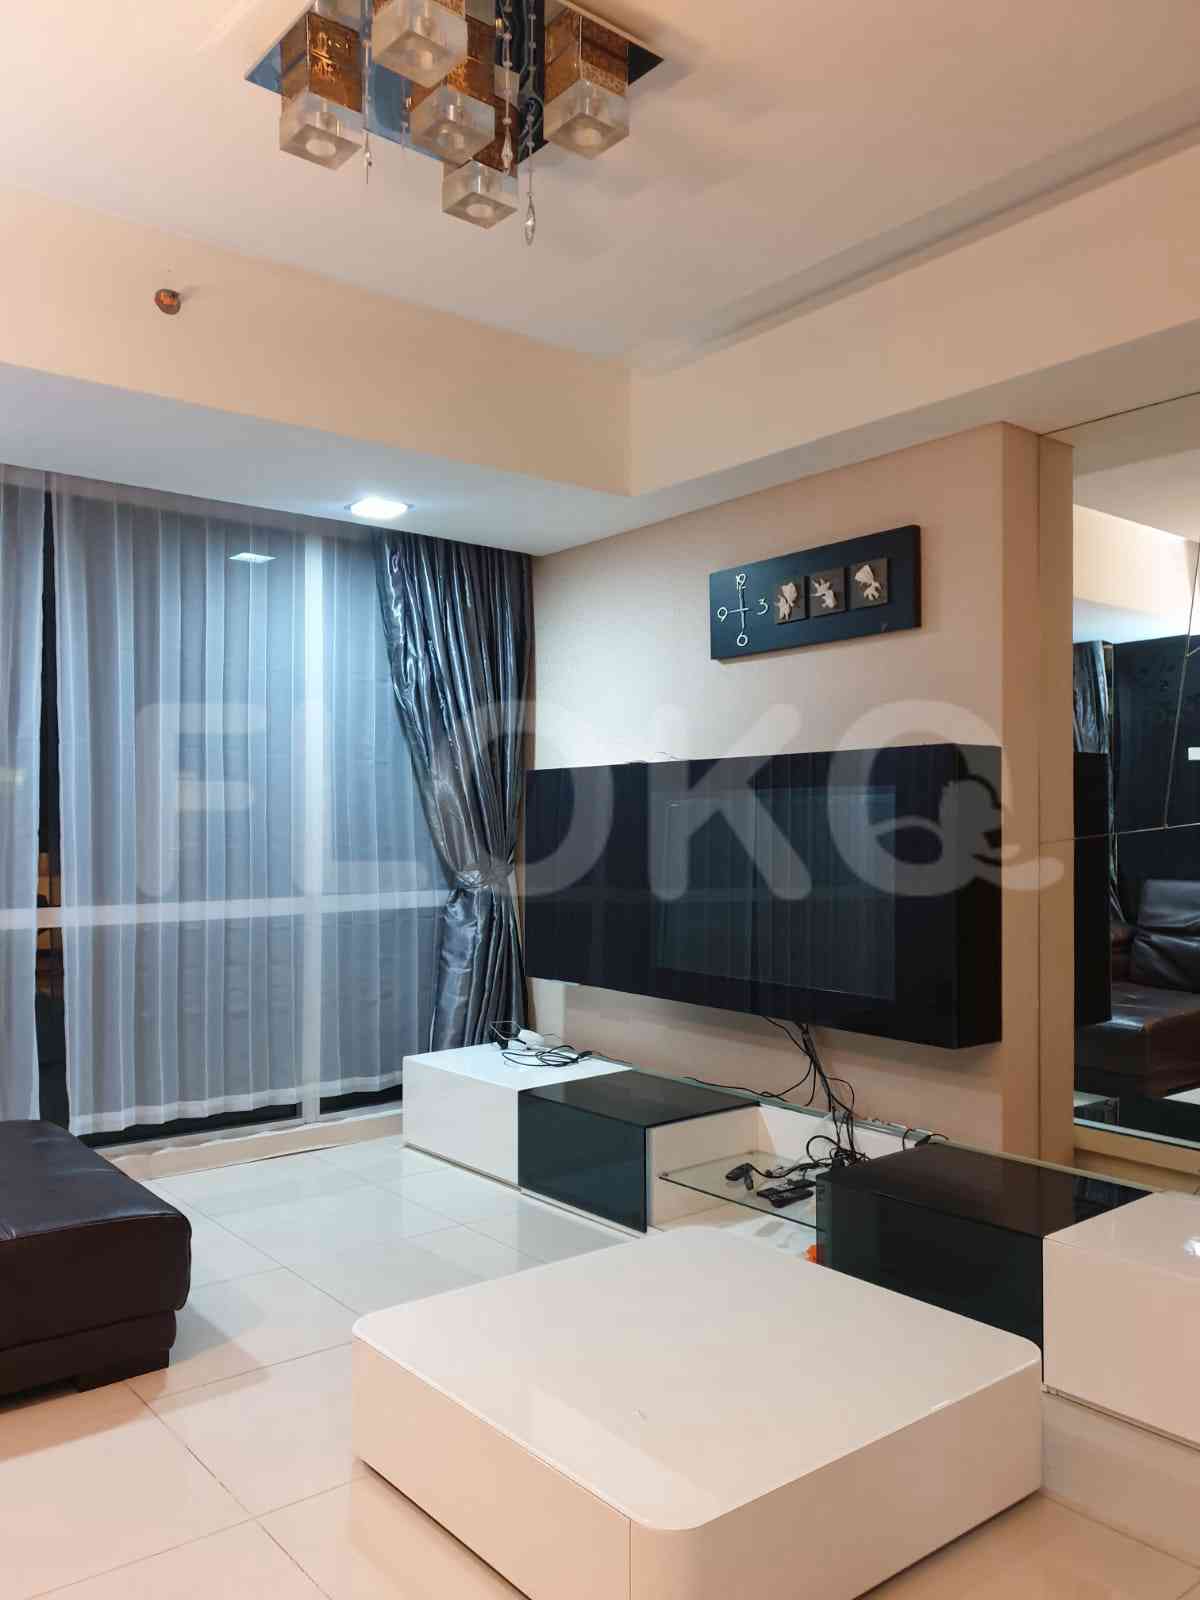 3 Bedroom on 16th Floor for Rent in Kemang Village Residence - fked77 7